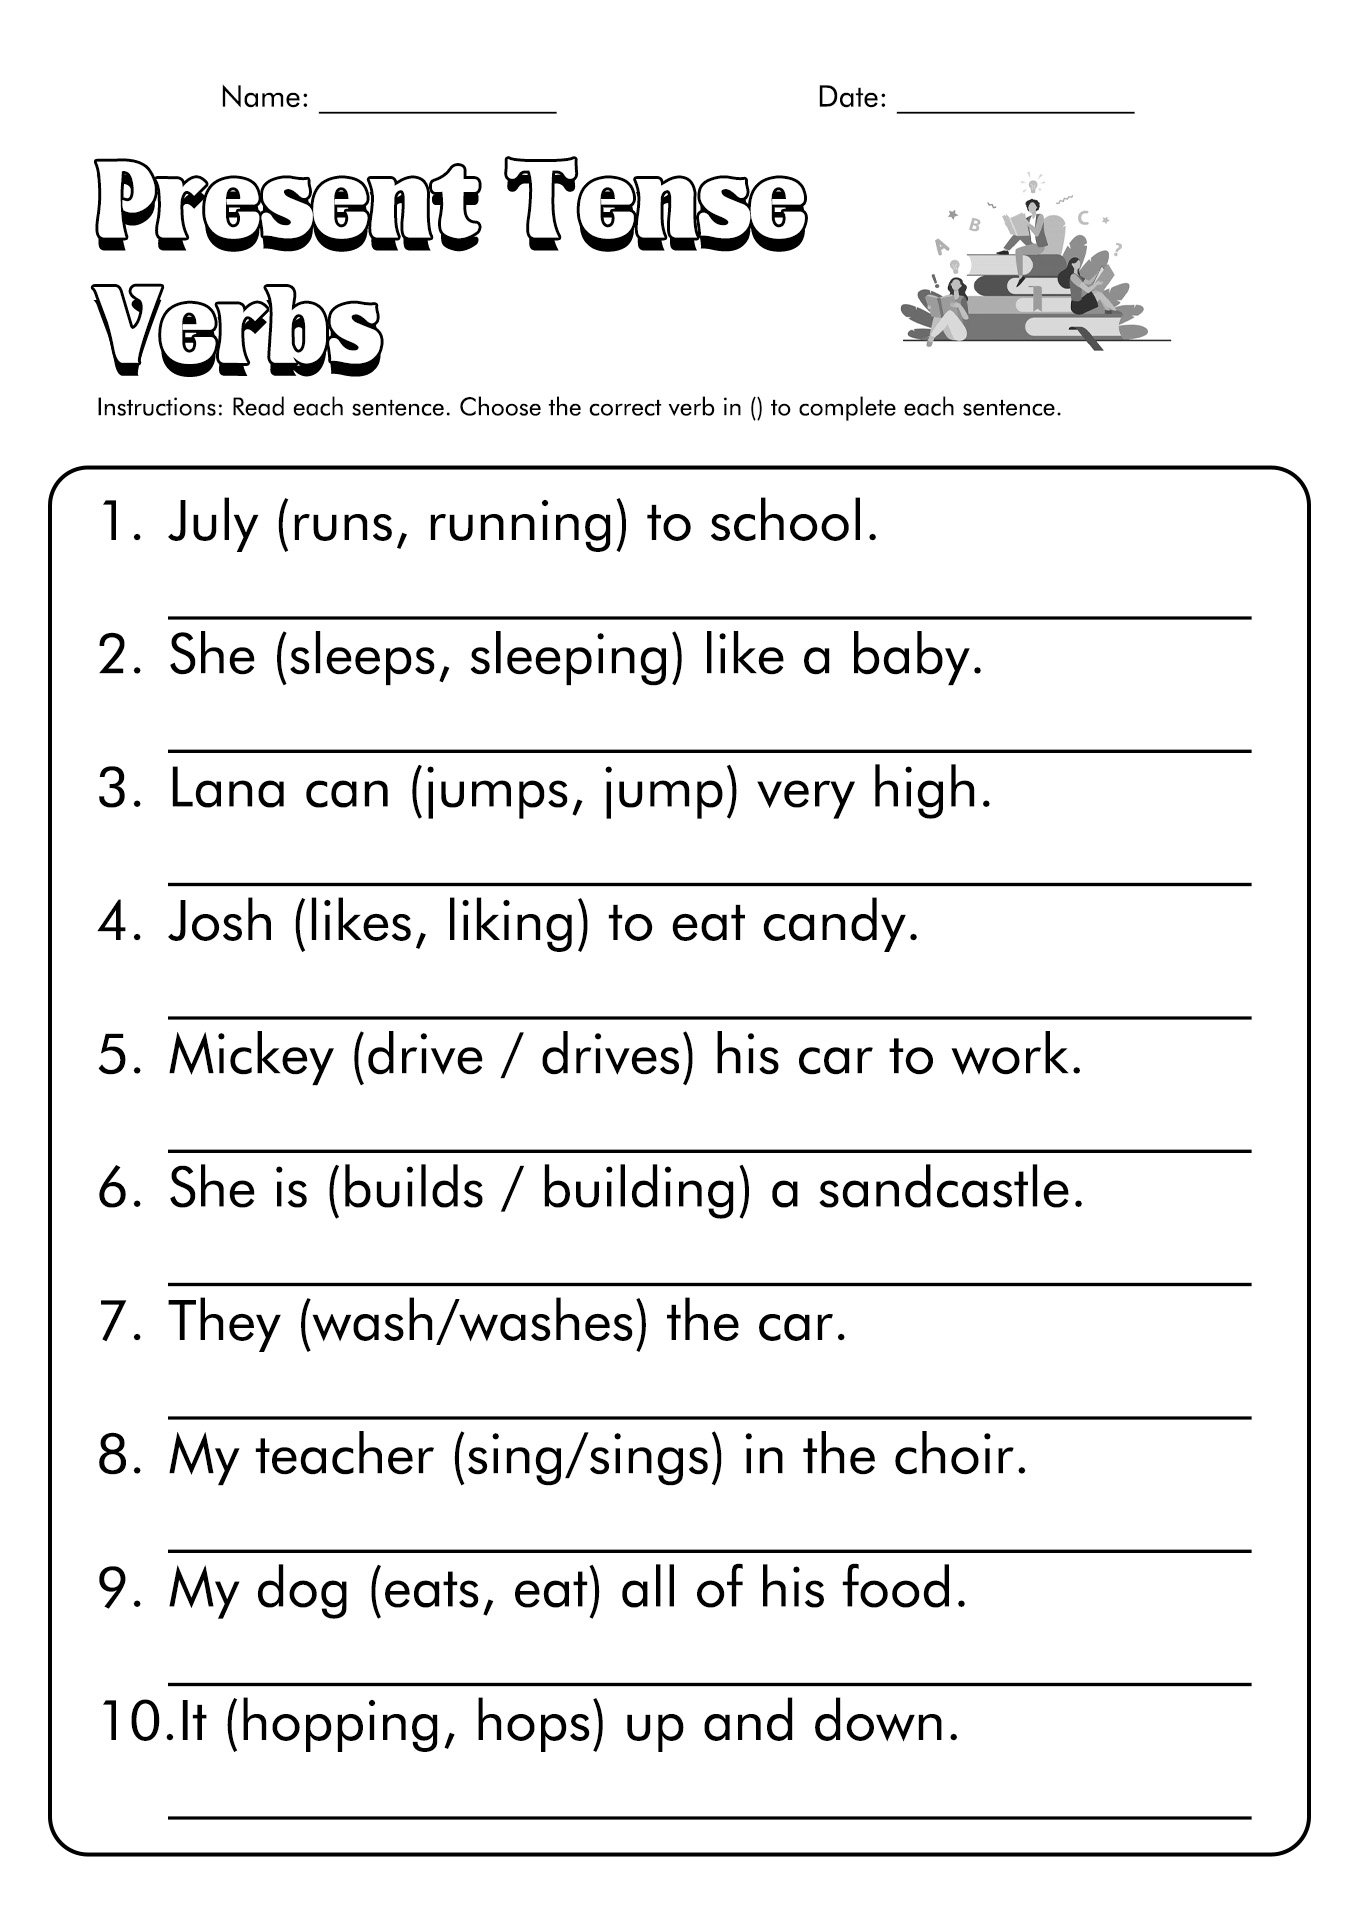 16 Best Images Of Past Tense Verbs Worksheets 2nd Grade Verb Tense Worksheets 3rd Grade 5th